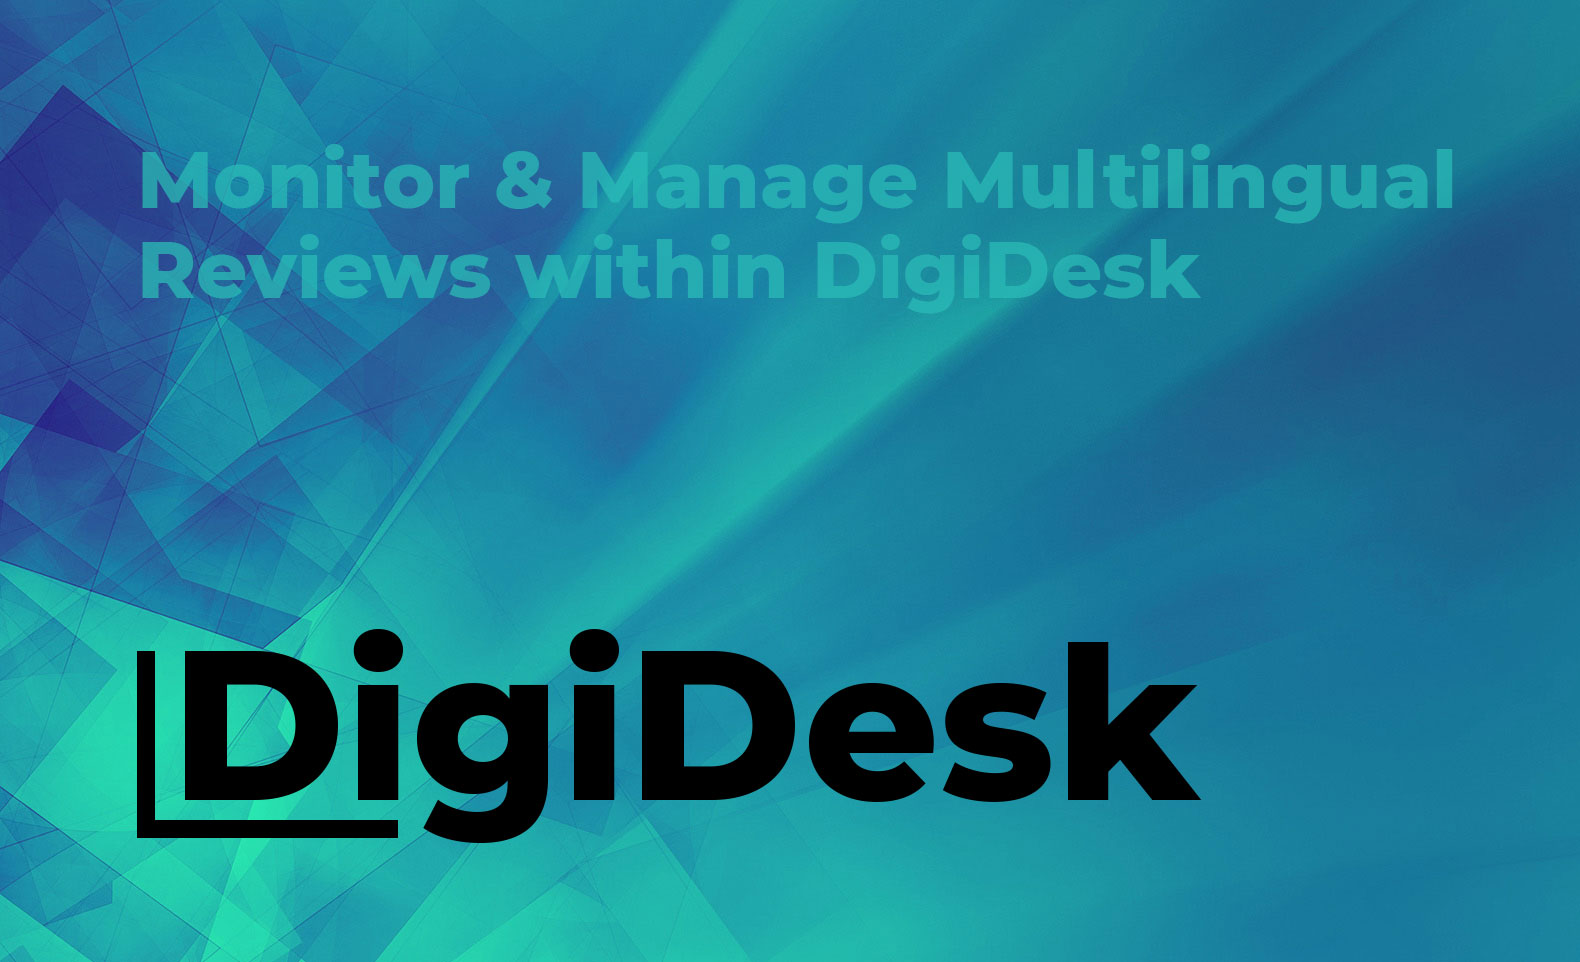 Monitor & Manage Multilingual Reviews within DigiDesk